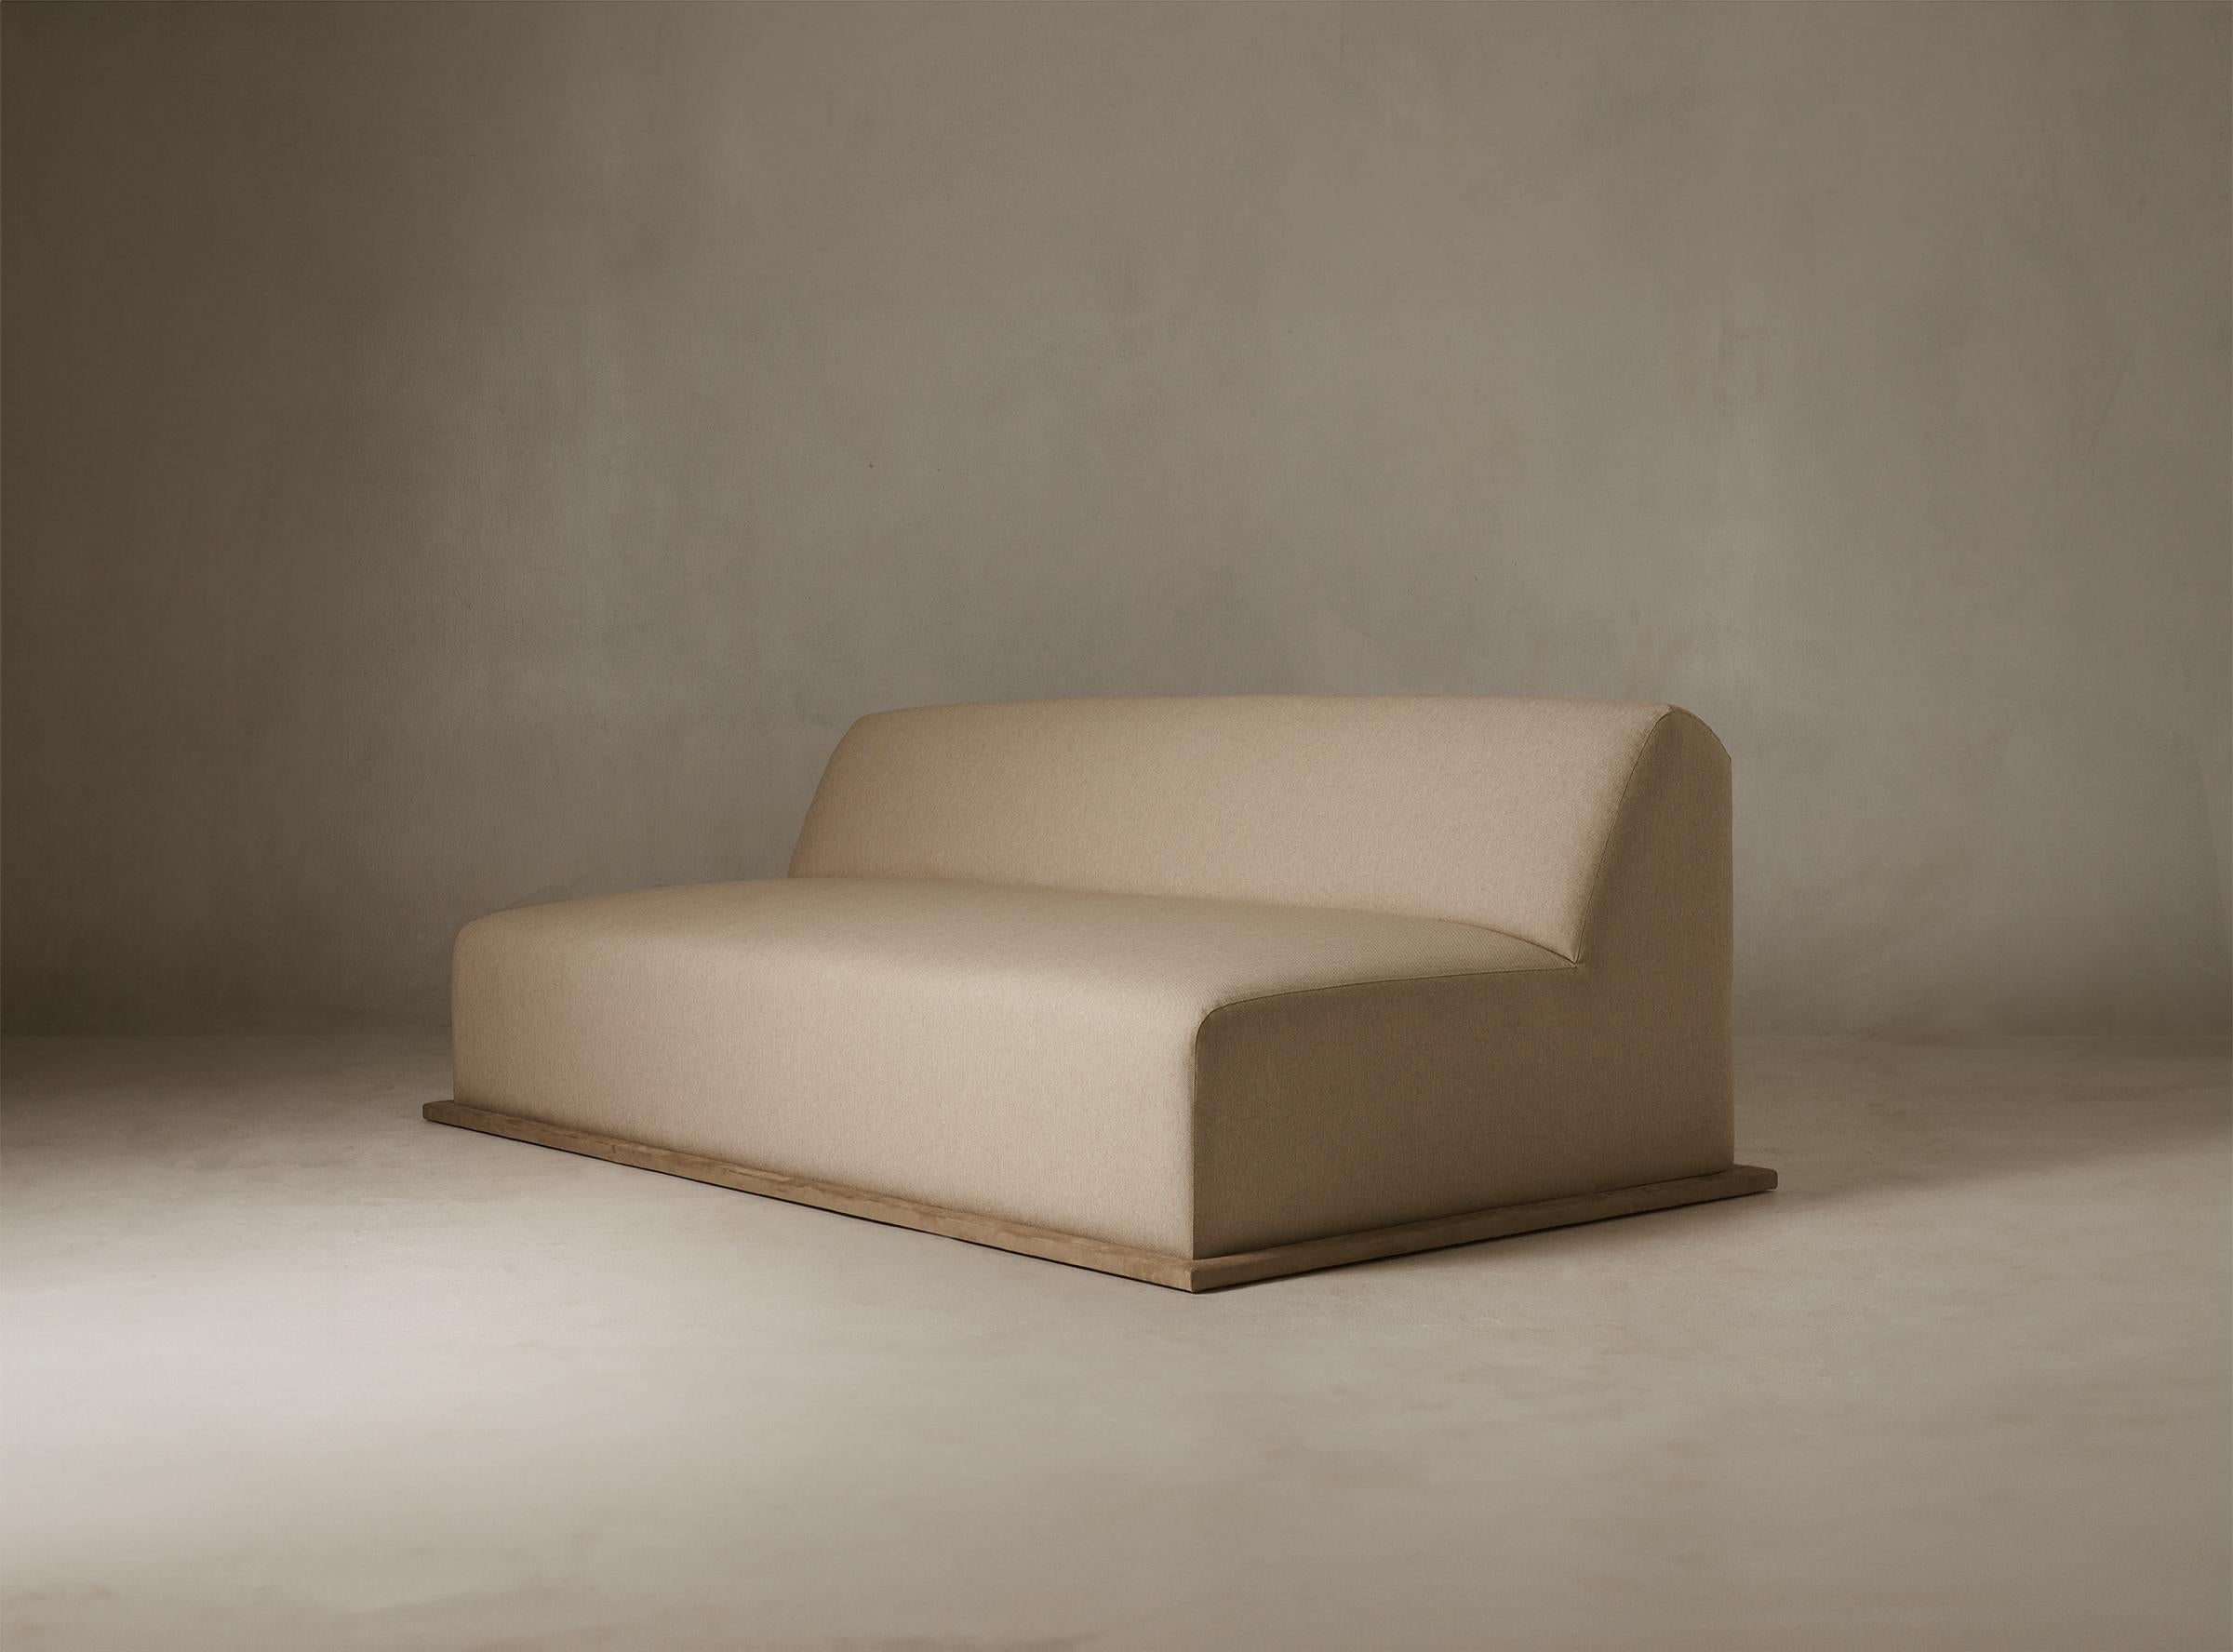 By understanding the three cultural philosophies of life below, we’ve designed this sofa to embody the feeling of
all three concepts.
• Lo Struscio: An Italian practice of slow-living. Italians believe that slowing down has the potential to not